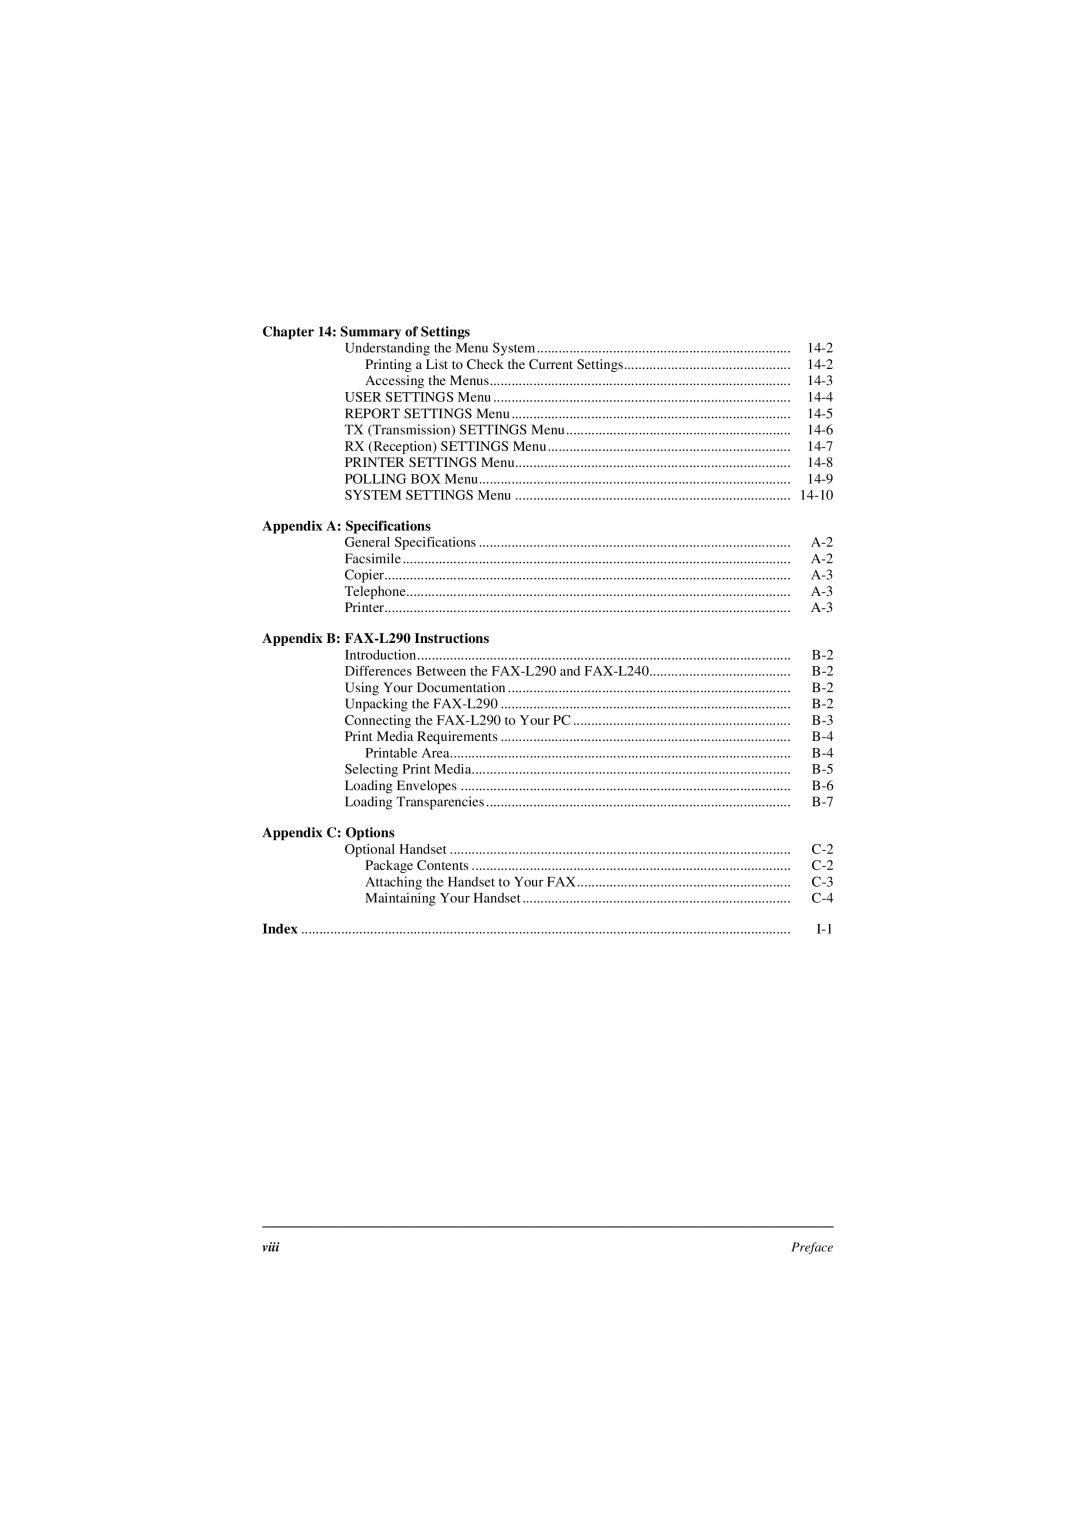 Canon L240 Summary of Settings, Appendix A Specifications, Appendix B FAX-L290 Instructions, Appendix C Options, Index 